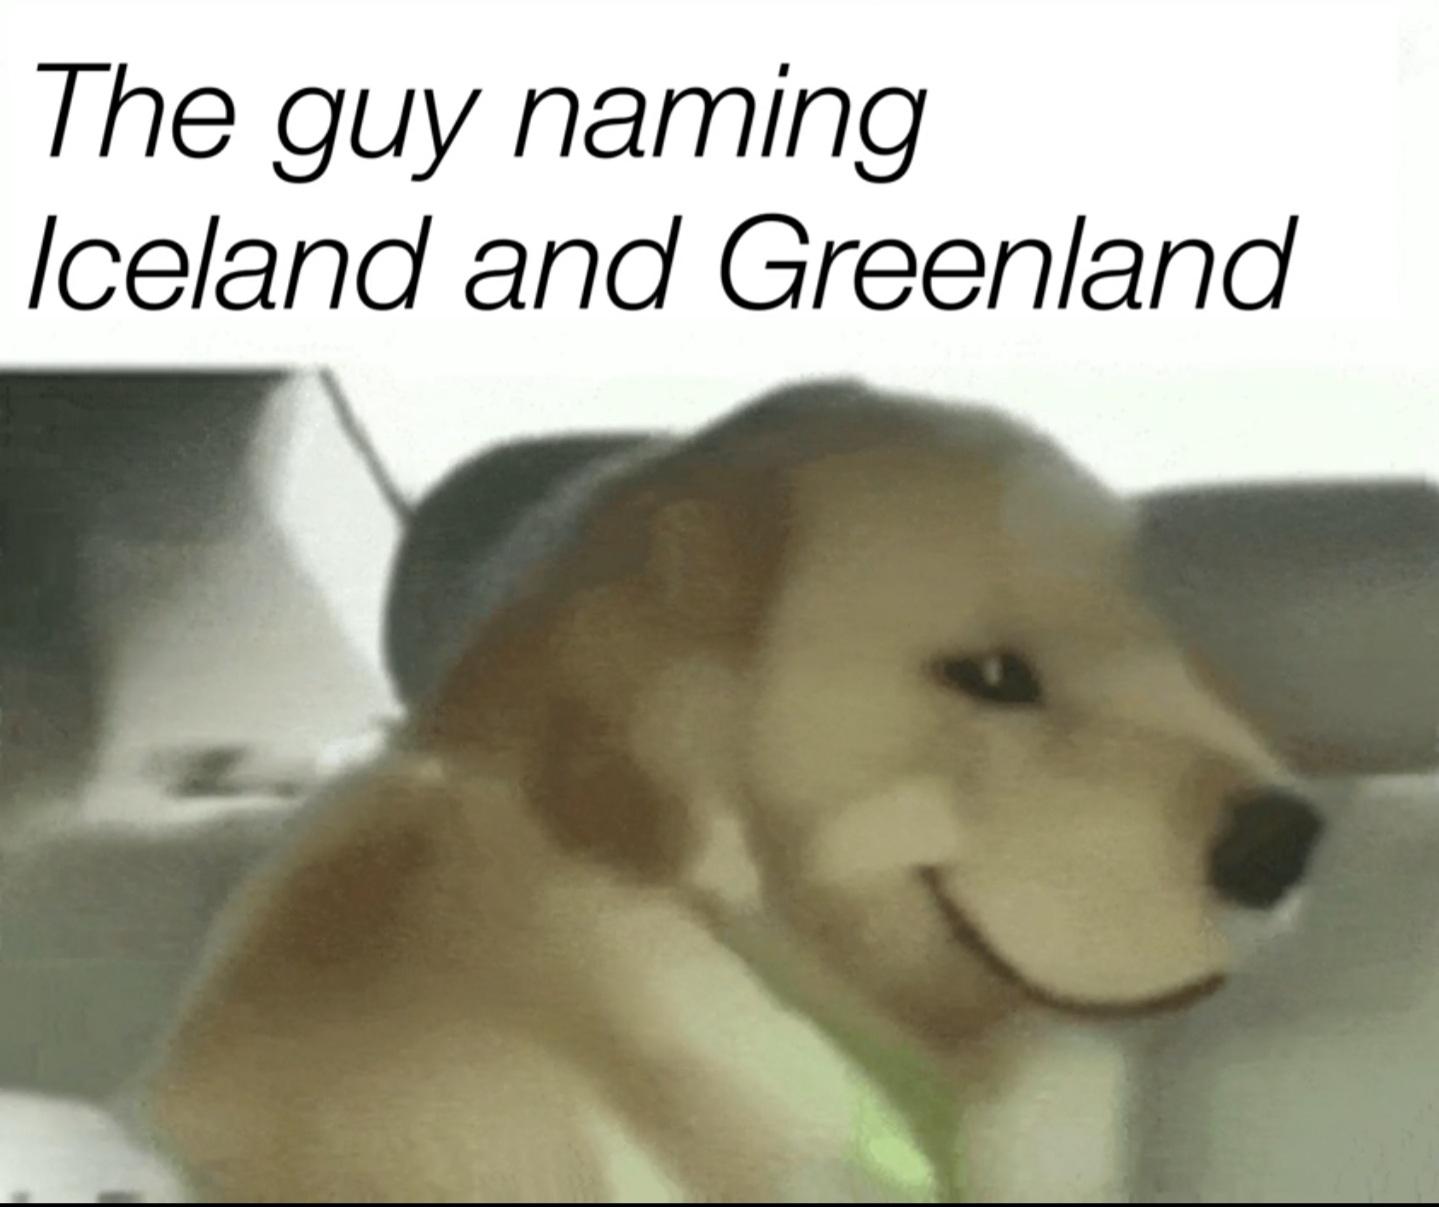 dank memes - funny memes - dog licking face meme - The guy naming Iceland and Greenland